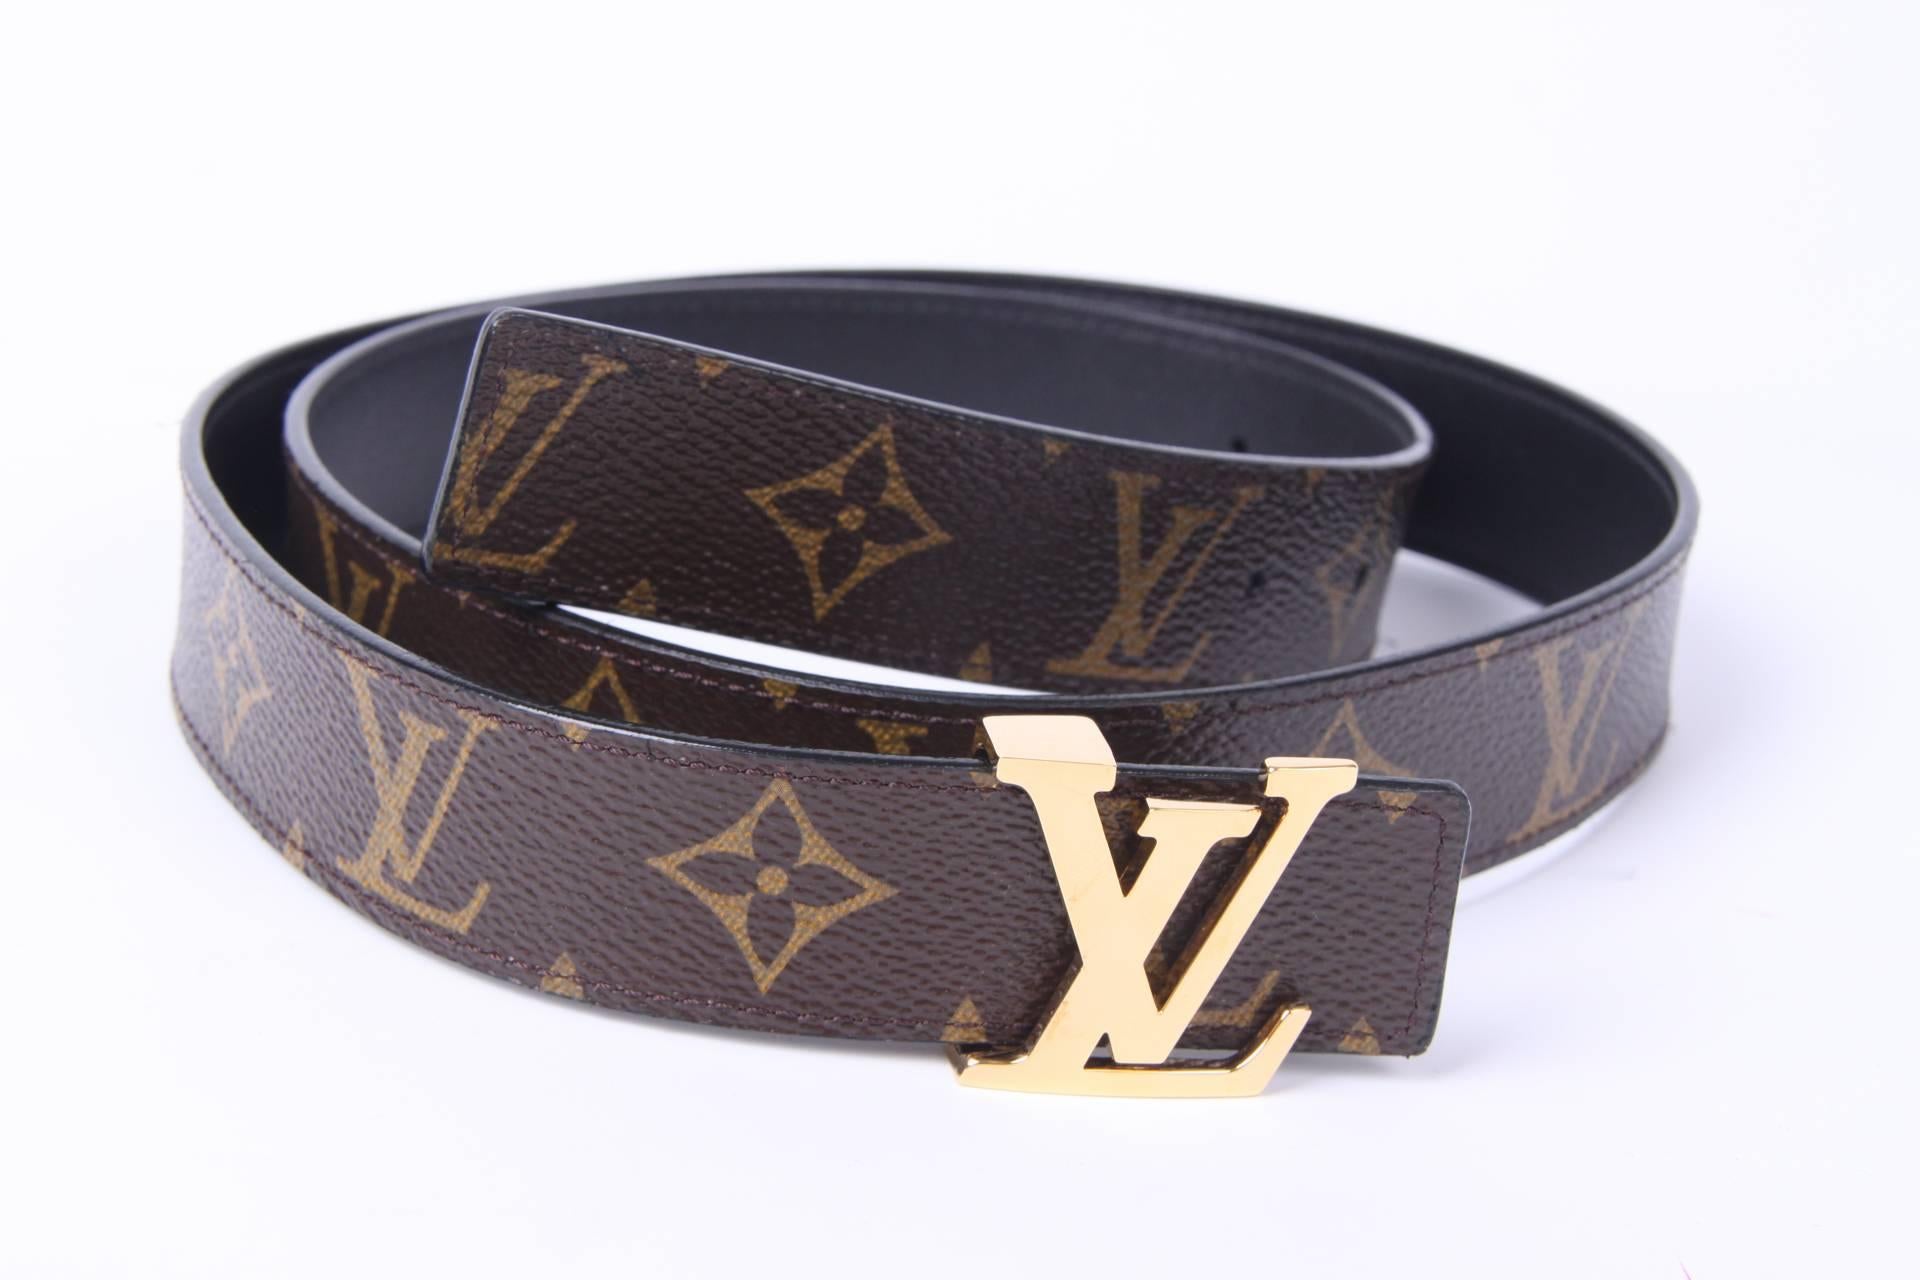 Classical belt by Louis Vuitton in dark brown canvas covered with the welknown LV monograms.

This belt is reversible, the other side is made of black leather. The LV buckle in gold-tone. Length of the belt is 90 centimeters and it's 3 centimeters